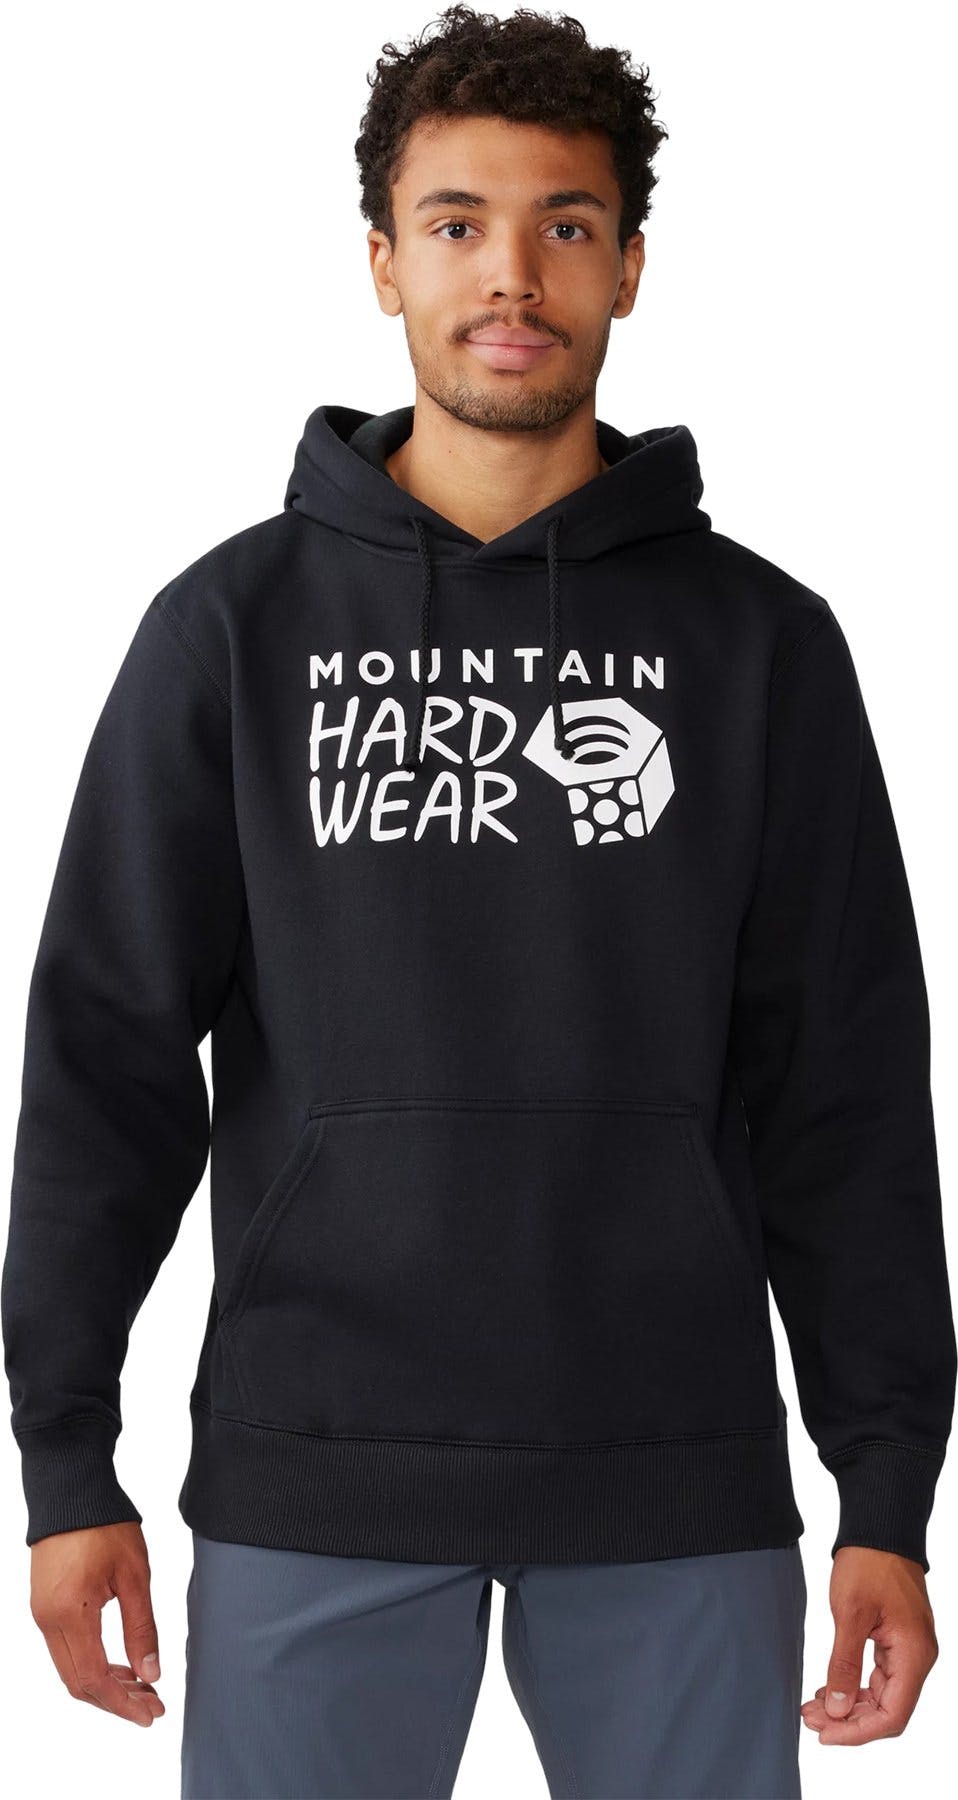 Product image for MHW Logo Pullover Hoody - Men's